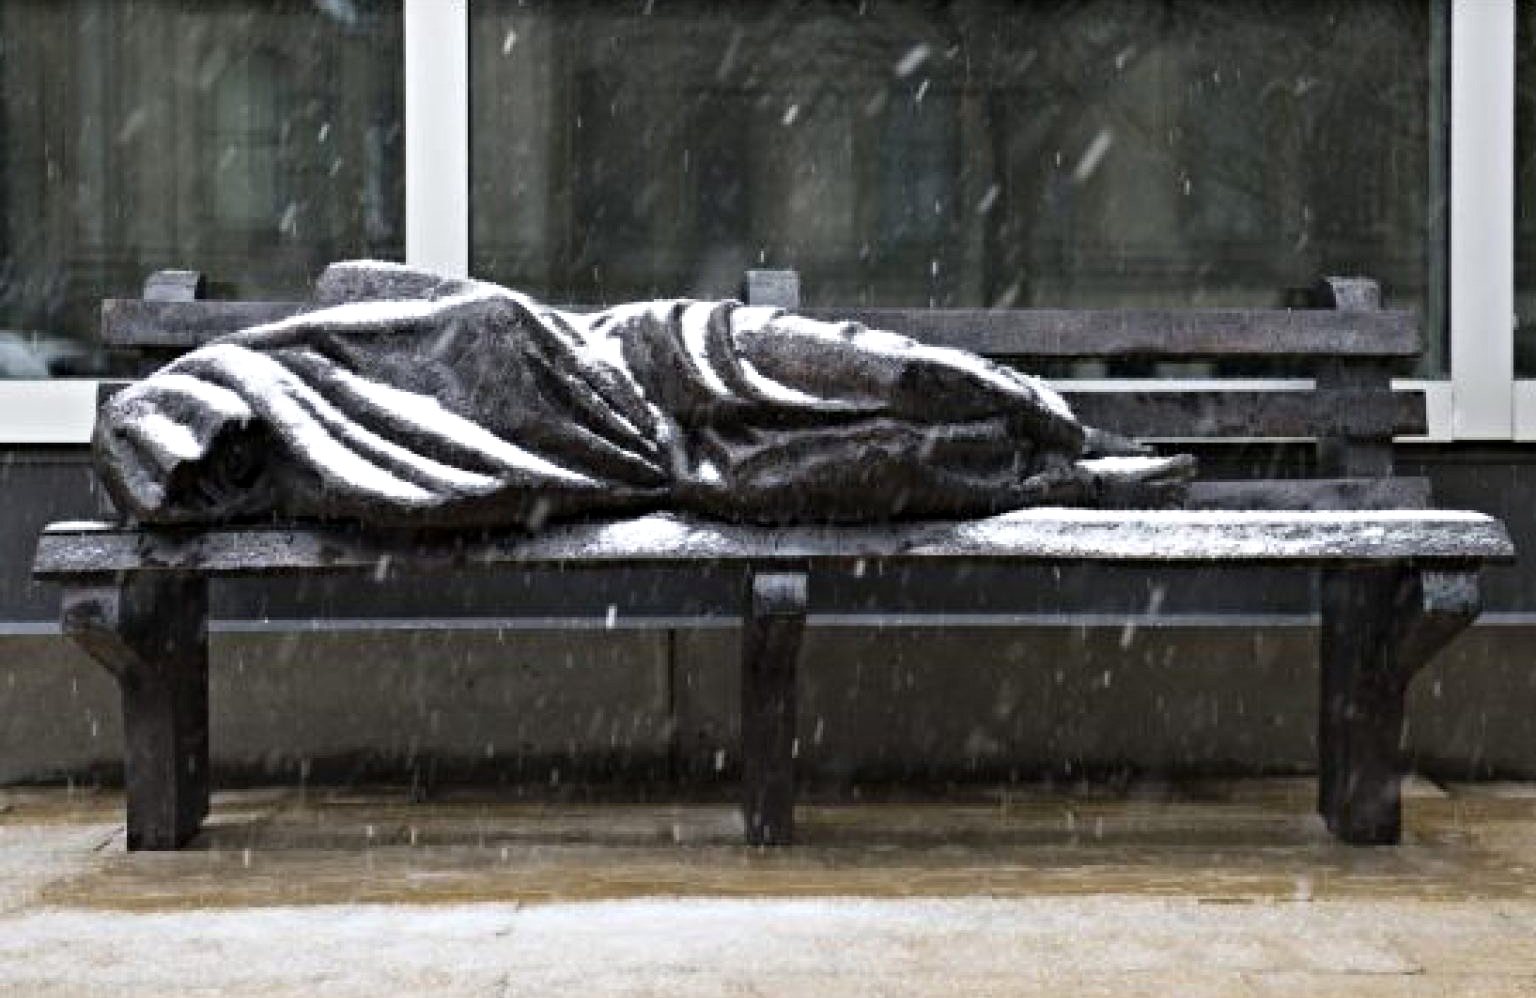 The Homeless Jesus sculpture by Timothy Schmalz